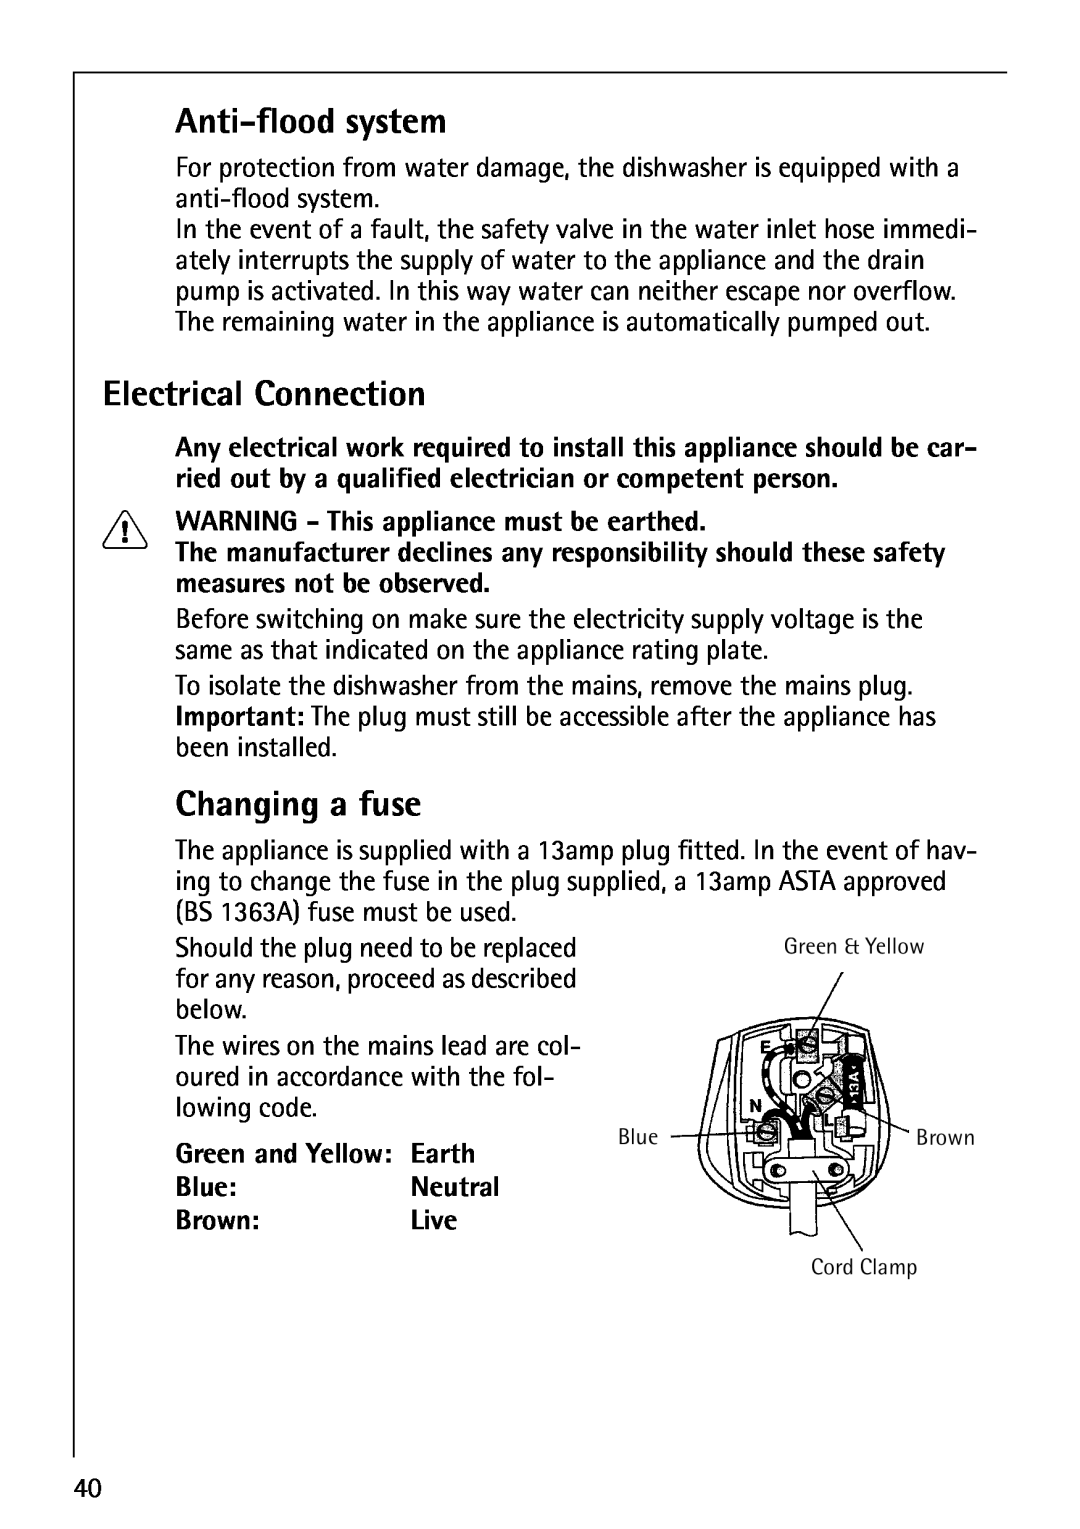 AEG 40850 manual Anti-floodsystem, Electrical Connection, Changing a fuse, WARNING - This appliance must be earthed 